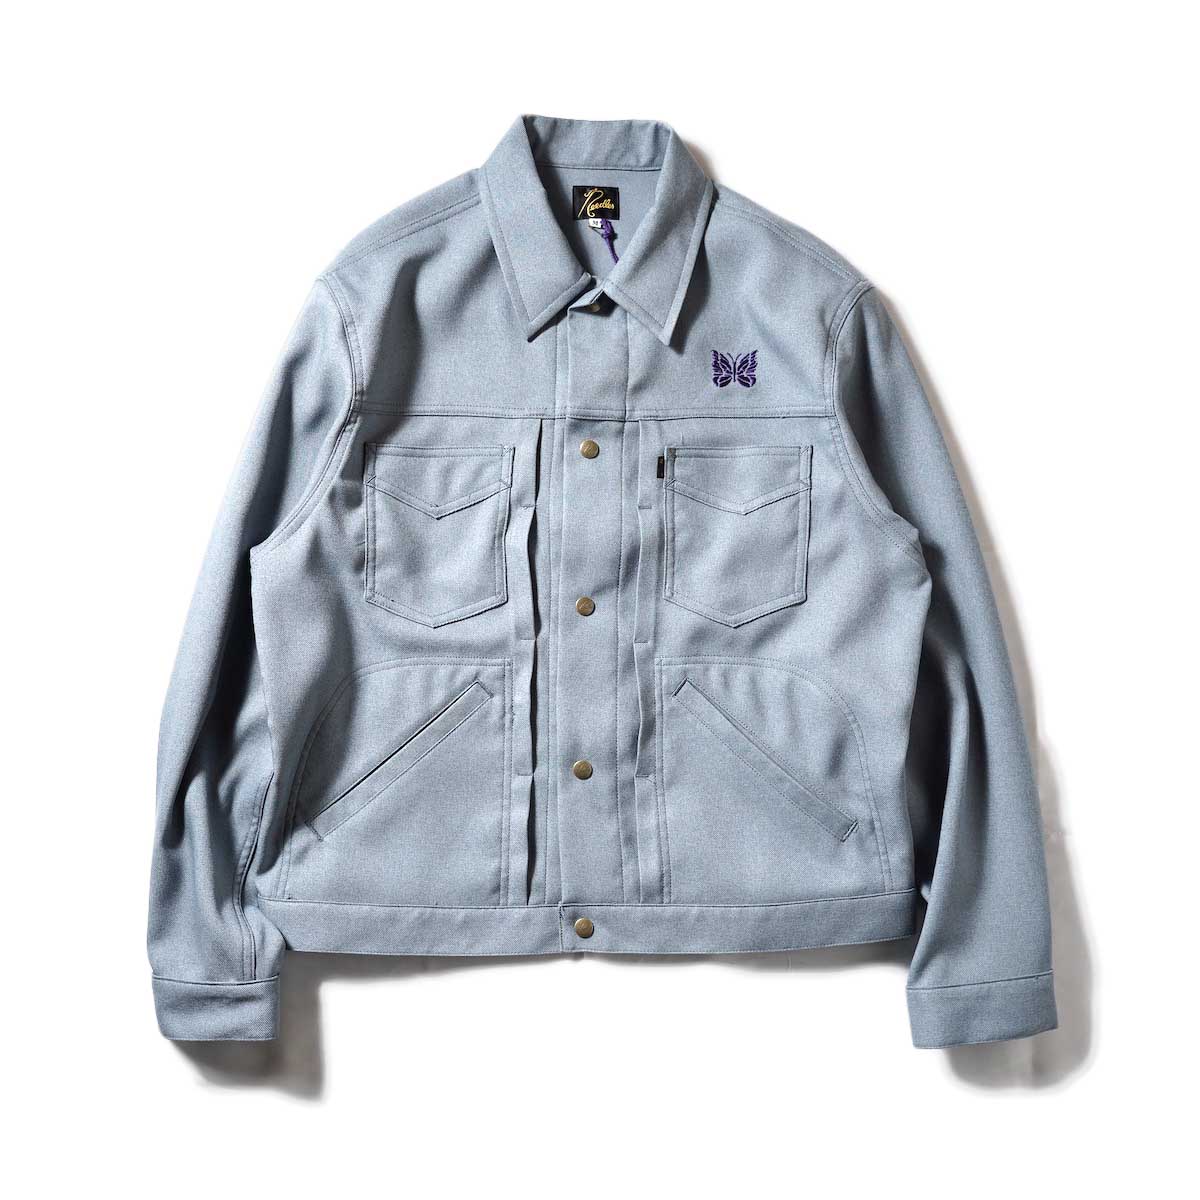 Needles / PENNY JEAN JACKET - POLY TWILL (Blue Gray)正面